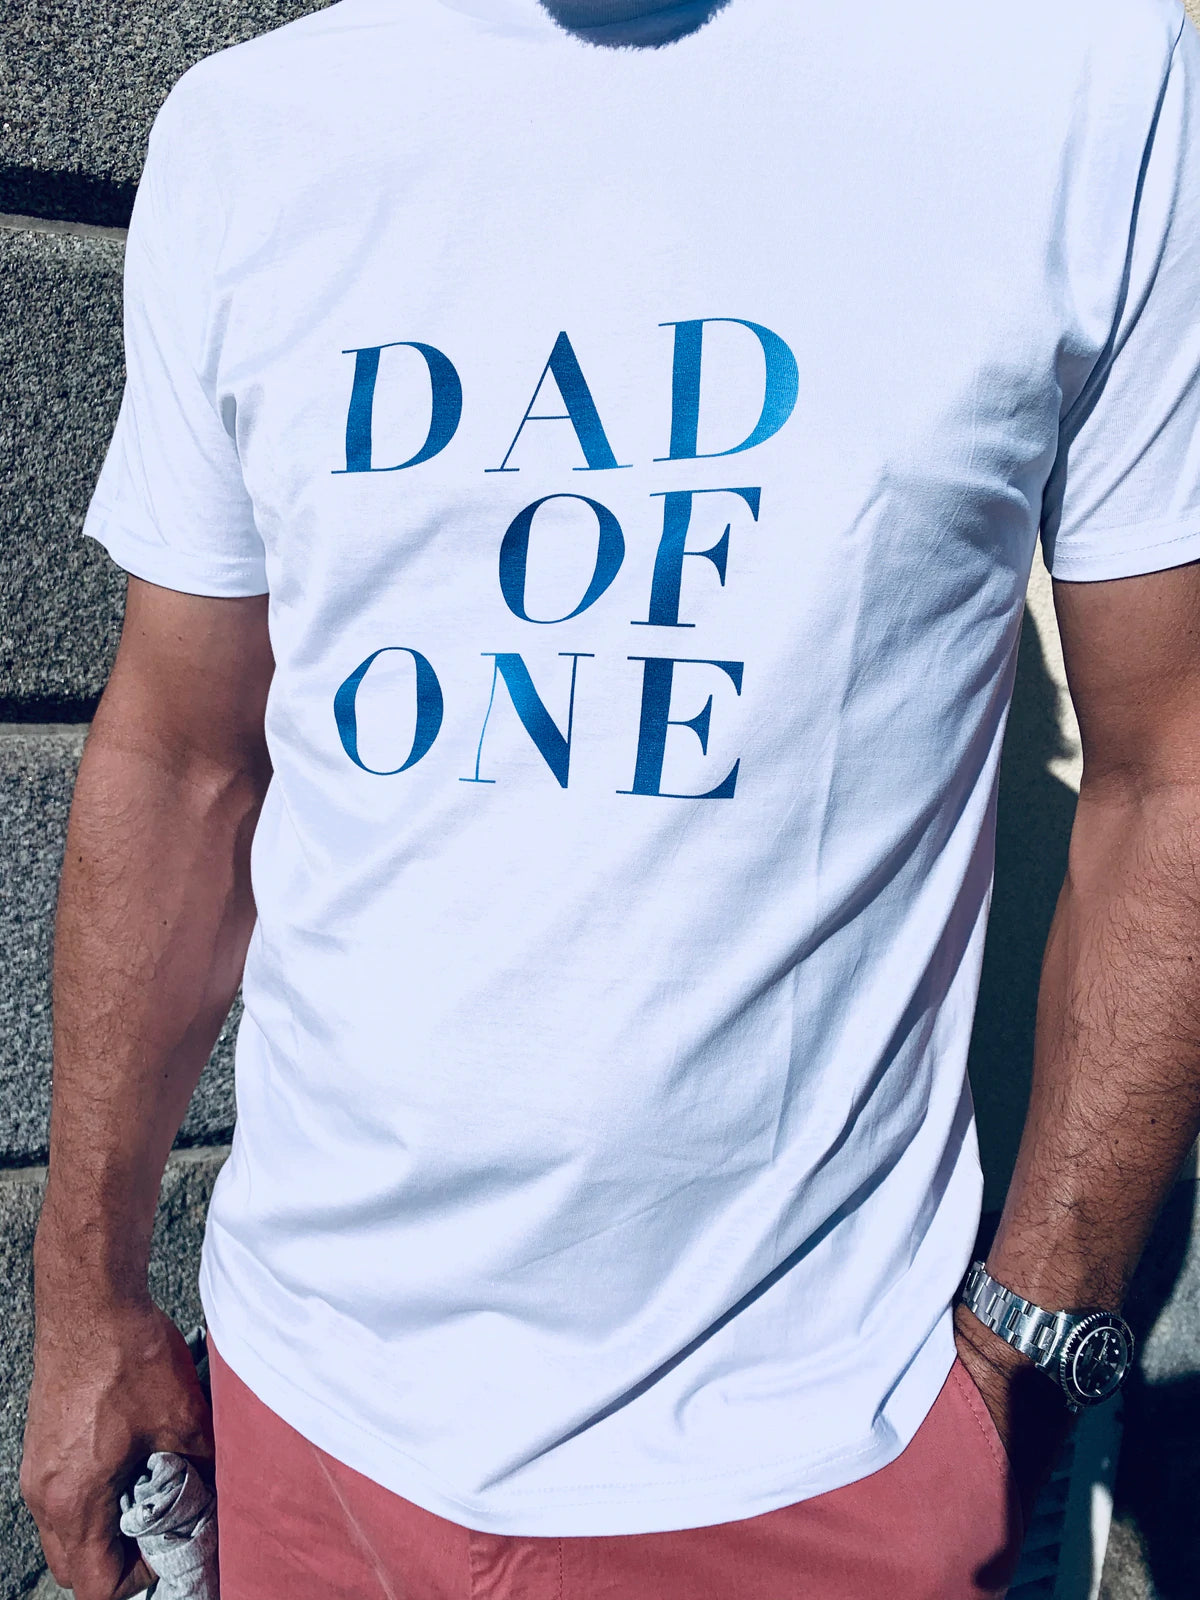 A TIE&amp;DYE DAD OF TWO T Shirt